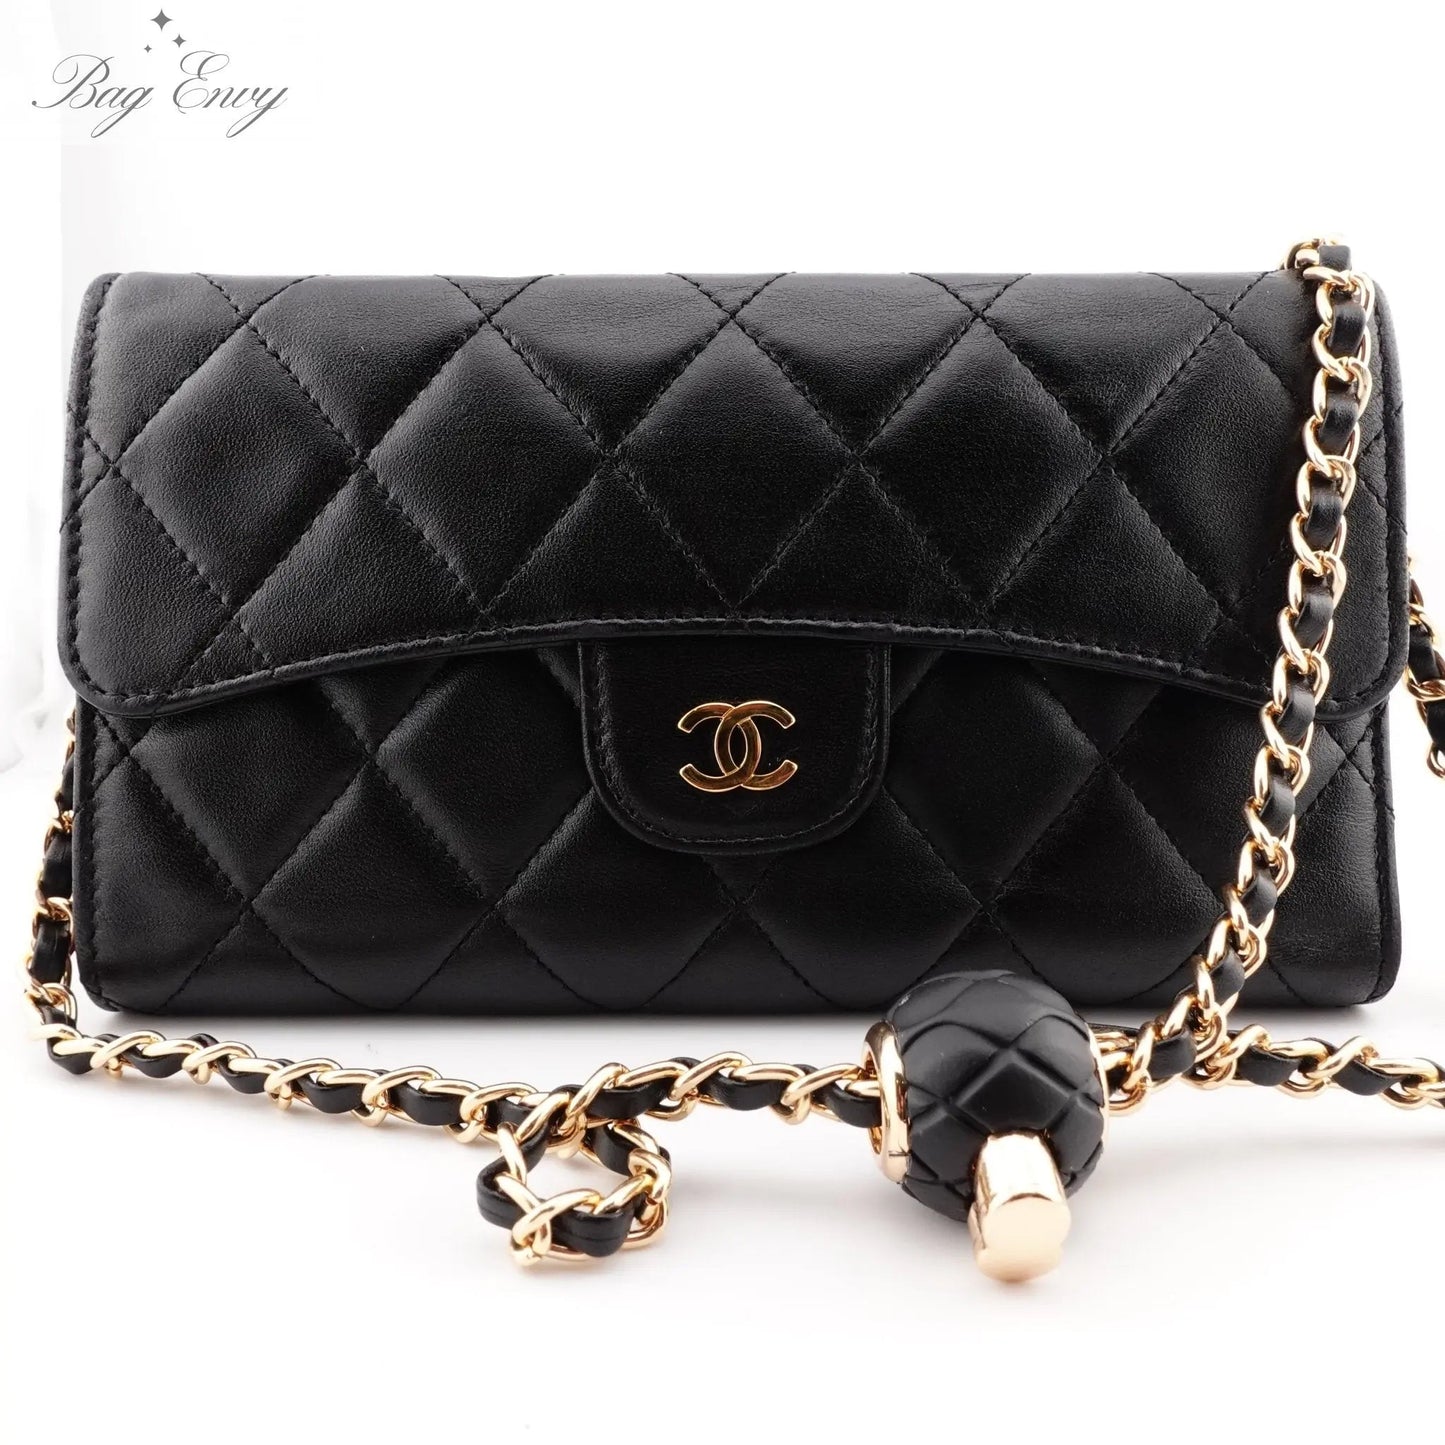 CHANEL Lambskin Classic Flap Wallet with Adjustable Chain - Bag Envy